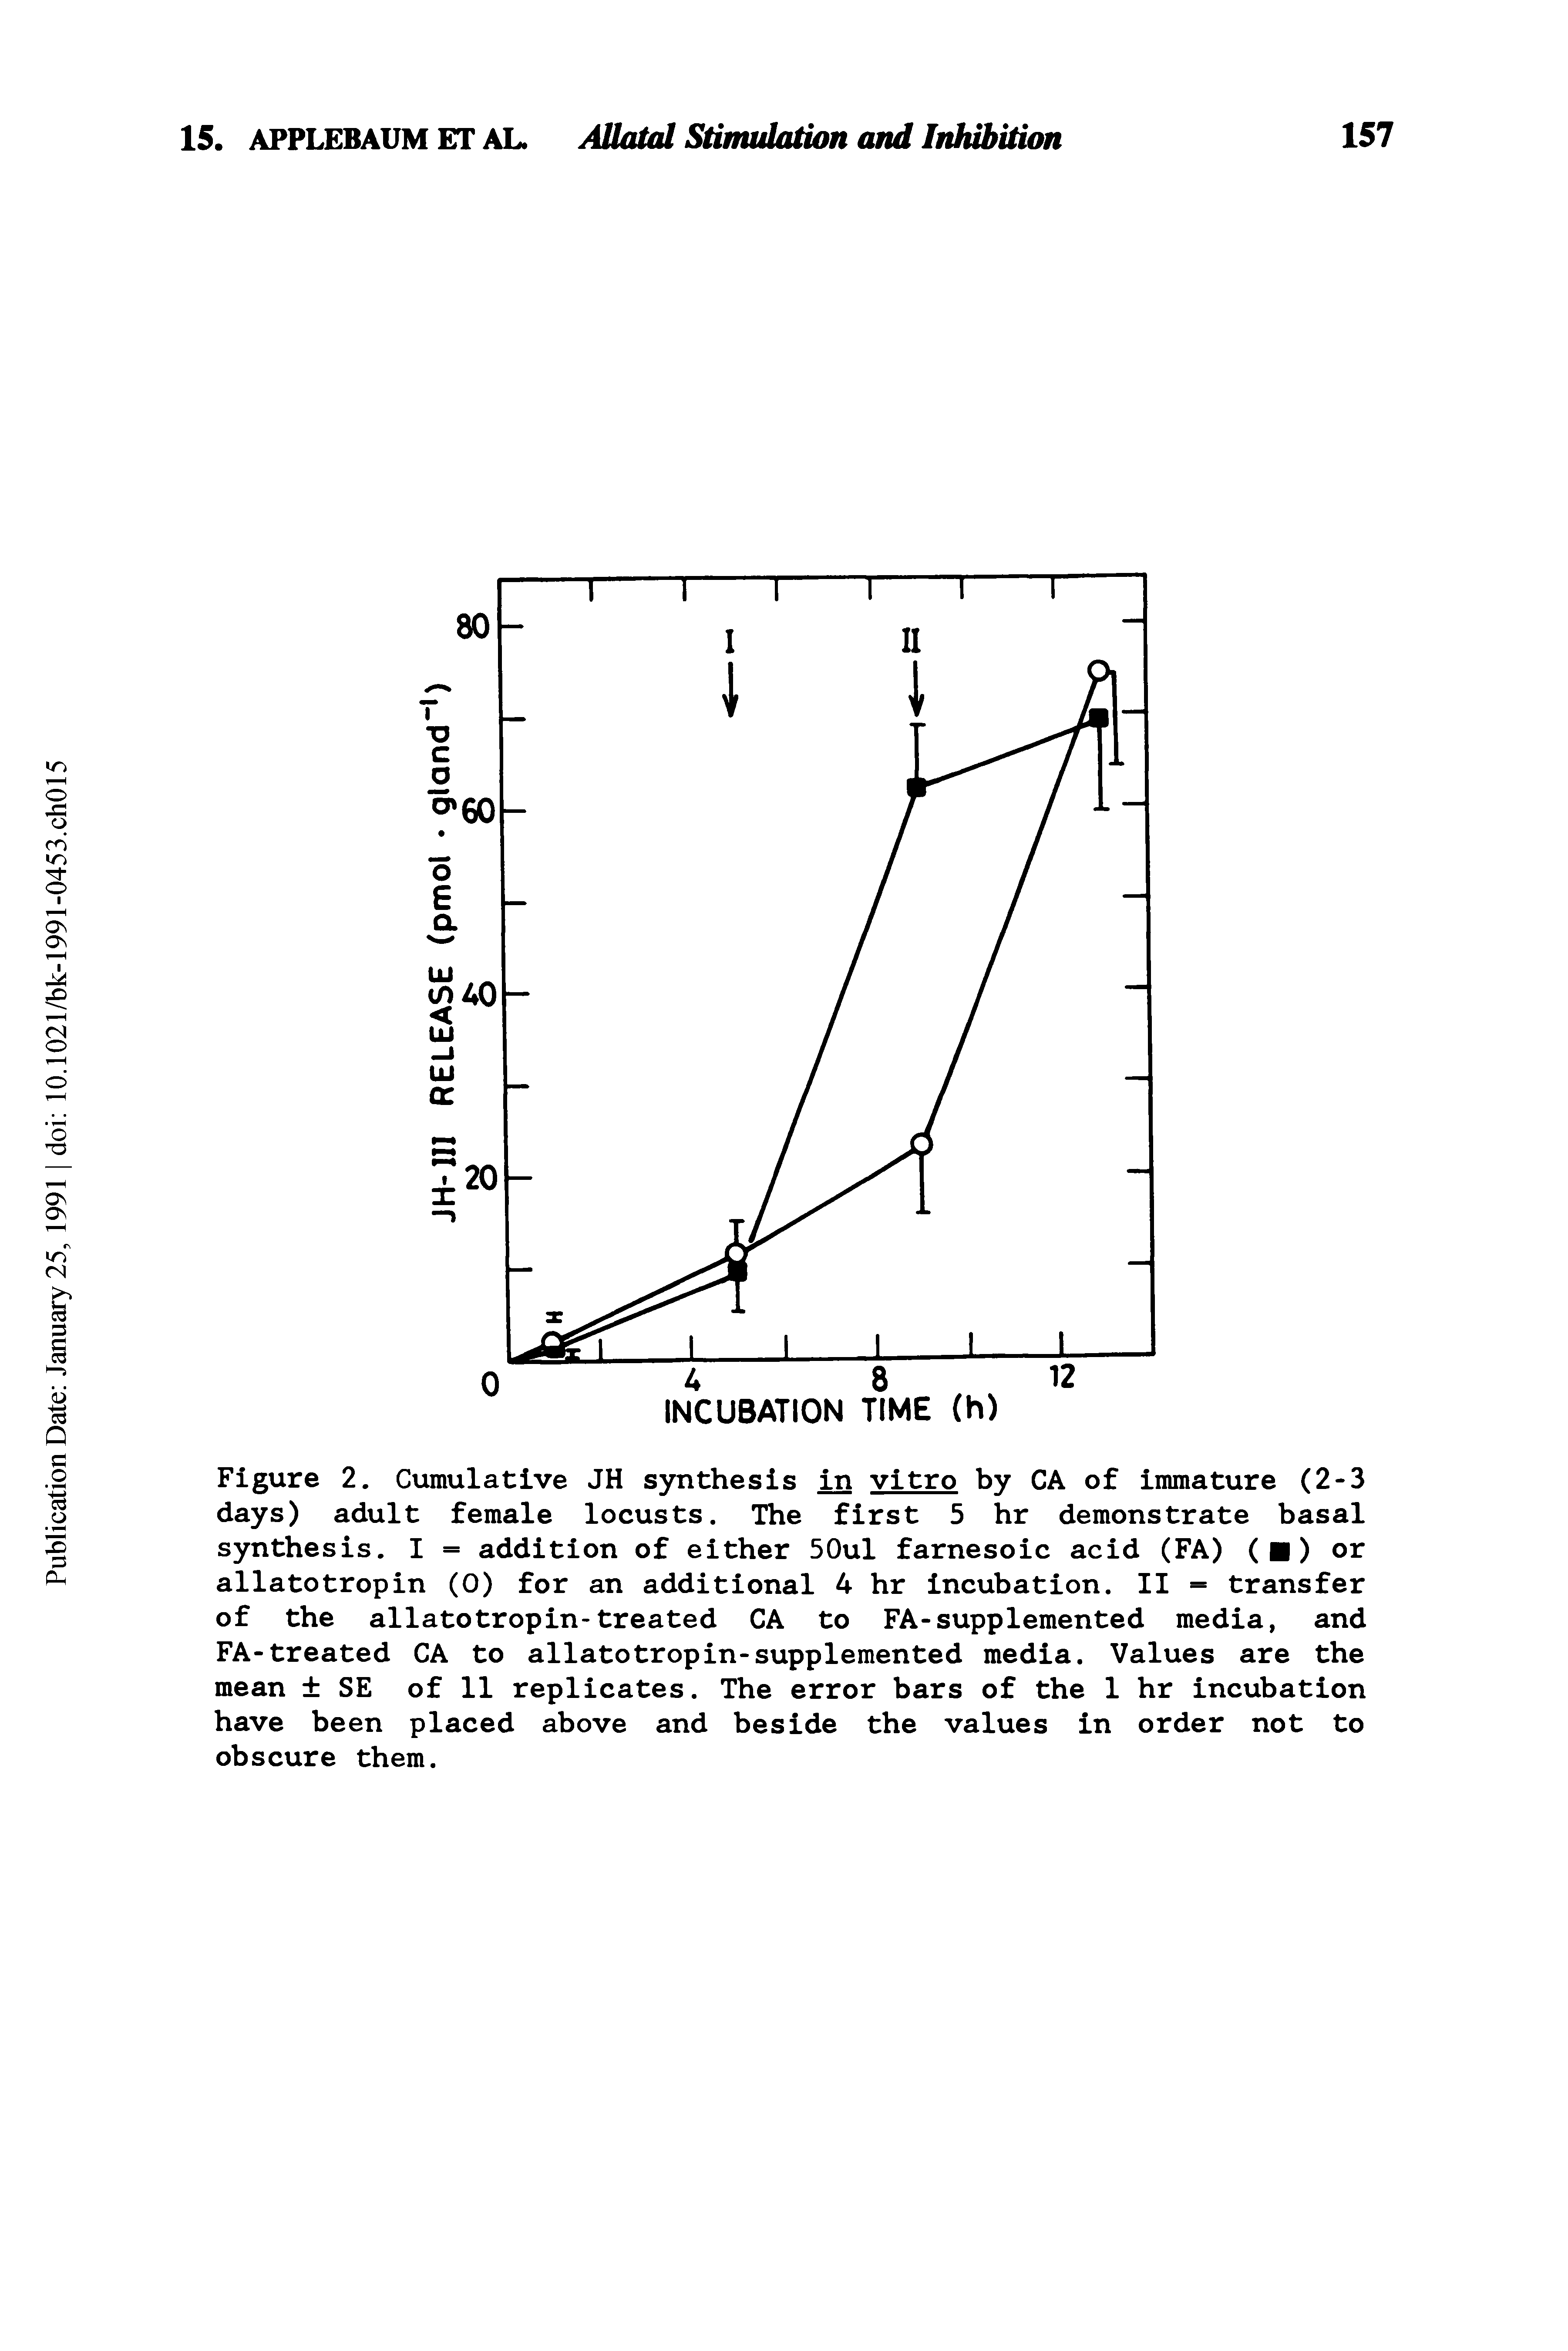 Figure 2. Cumulative JH sjmthesis in vitro by CA of immature (2-3 days) adult female locusts. The first 5 hr demonstrate basal synthesis. I = addition of either 50ul farnesoic acid (FA) ( ) or allatotropin (0) for an additional 4 hr incubation. II - transfer of the allato tropin-treated CA to FA-supplemented media, and FA-treated CA to allato tropin-supplemented media. Values are the mean SE of 11 replicates. The error bars of the 1 hr incubation have been placed above and beside the values in order not to obscure them.